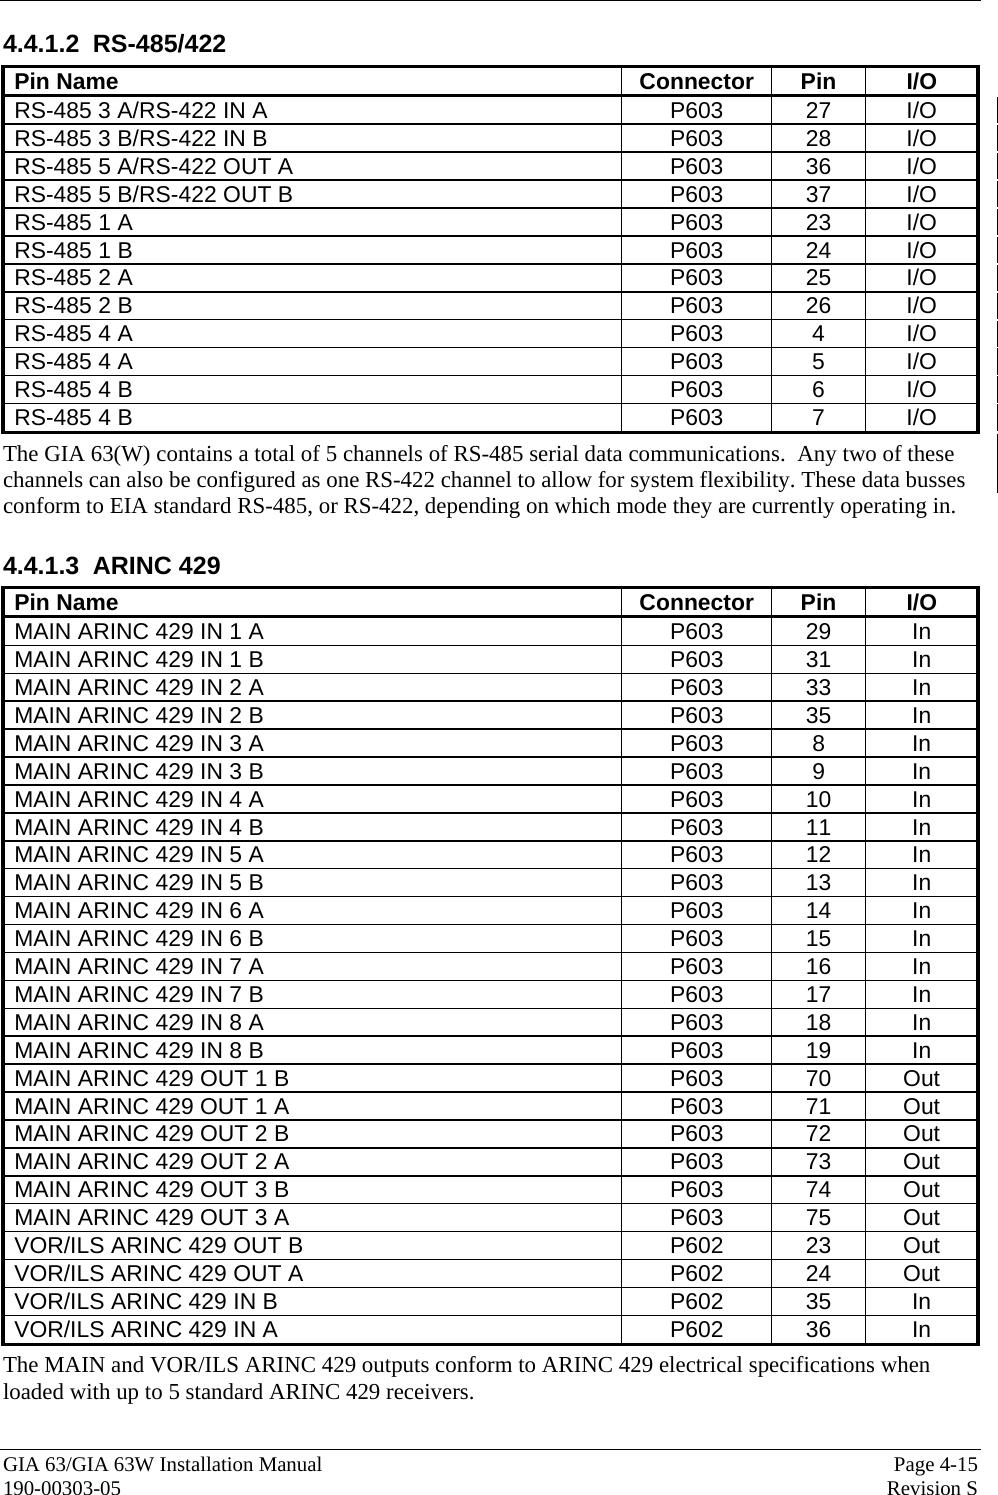  GIA 63/GIA 63W Installation Manual  Page 4-15 190-00303-05  Revision S 4.4.1.2 RS-485/422 Pin Name  Connector  Pin  I/O RS-485 3 A/RS-422 IN A  P603 27 I/O RS-485 3 B/RS-422 IN B  P603 28 I/O RS-485 5 A/RS-422 OUT A  P603 36 I/O RS-485 5 B/RS-422 OUT B  P603 37 I/O RS-485 1 A  P603 23 I/O RS-485 1 B  P603 24 I/O RS-485 2 A  P603 25 I/O RS-485 2 B  P603 26 I/O RS-485 4 A  P603 4 I/O RS-485 4 A  P603 5 I/O RS-485 4 B    P603 6 I/O RS-485 4 B  P603 7 I/O The GIA 63(W) contains a total of 5 channels of RS-485 serial data communications.  Any two of these channels can also be configured as one RS-422 channel to allow for system flexibility. These data busses conform to EIA standard RS-485, or RS-422, depending on which mode they are currently operating in.  4.4.1.3 ARINC 429 Pin Name  Connector  Pin  I/O MAIN ARINC 429 IN 1 A  P603  29  In MAIN ARINC 429 IN 1 B  P603  31  In MAIN ARINC 429 IN 2 A  P603  33  In MAIN ARINC 429 IN 2 B  P603  35  In MAIN ARINC 429 IN 3 A  P603  8  In MAIN ARINC 429 IN 3 B  P603  9  In MAIN ARINC 429 IN 4 A  P603  10  In MAIN ARINC 429 IN 4 B  P603  11  In MAIN ARINC 429 IN 5 A  P603  12  In MAIN ARINC 429 IN 5 B  P603  13  In MAIN ARINC 429 IN 6 A  P603  14  In MAIN ARINC 429 IN 6 B  P603  15  In MAIN ARINC 429 IN 7 A  P603  16  In MAIN ARINC 429 IN 7 B  P603  17  In MAIN ARINC 429 IN 8 A  P603  18  In MAIN ARINC 429 IN 8 B  P603  19  In MAIN ARINC 429 OUT 1 B  P603  70  Out MAIN ARINC 429 OUT 1 A  P603  71  Out MAIN ARINC 429 OUT 2 B  P603  72  Out MAIN ARINC 429 OUT 2 A  P603  73  Out MAIN ARINC 429 OUT 3 B  P603  74  Out MAIN ARINC 429 OUT 3 A  P603  75  Out VOR/ILS ARINC 429 OUT B  P602  23  Out VOR/ILS ARINC 429 OUT A  P602  24  Out VOR/ILS ARINC 429 IN B  P602  35  In VOR/ILS ARINC 429 IN A  P602  36  In The MAIN and VOR/ILS ARINC 429 outputs conform to ARINC 429 electrical specifications when loaded with up to 5 standard ARINC 429 receivers. 